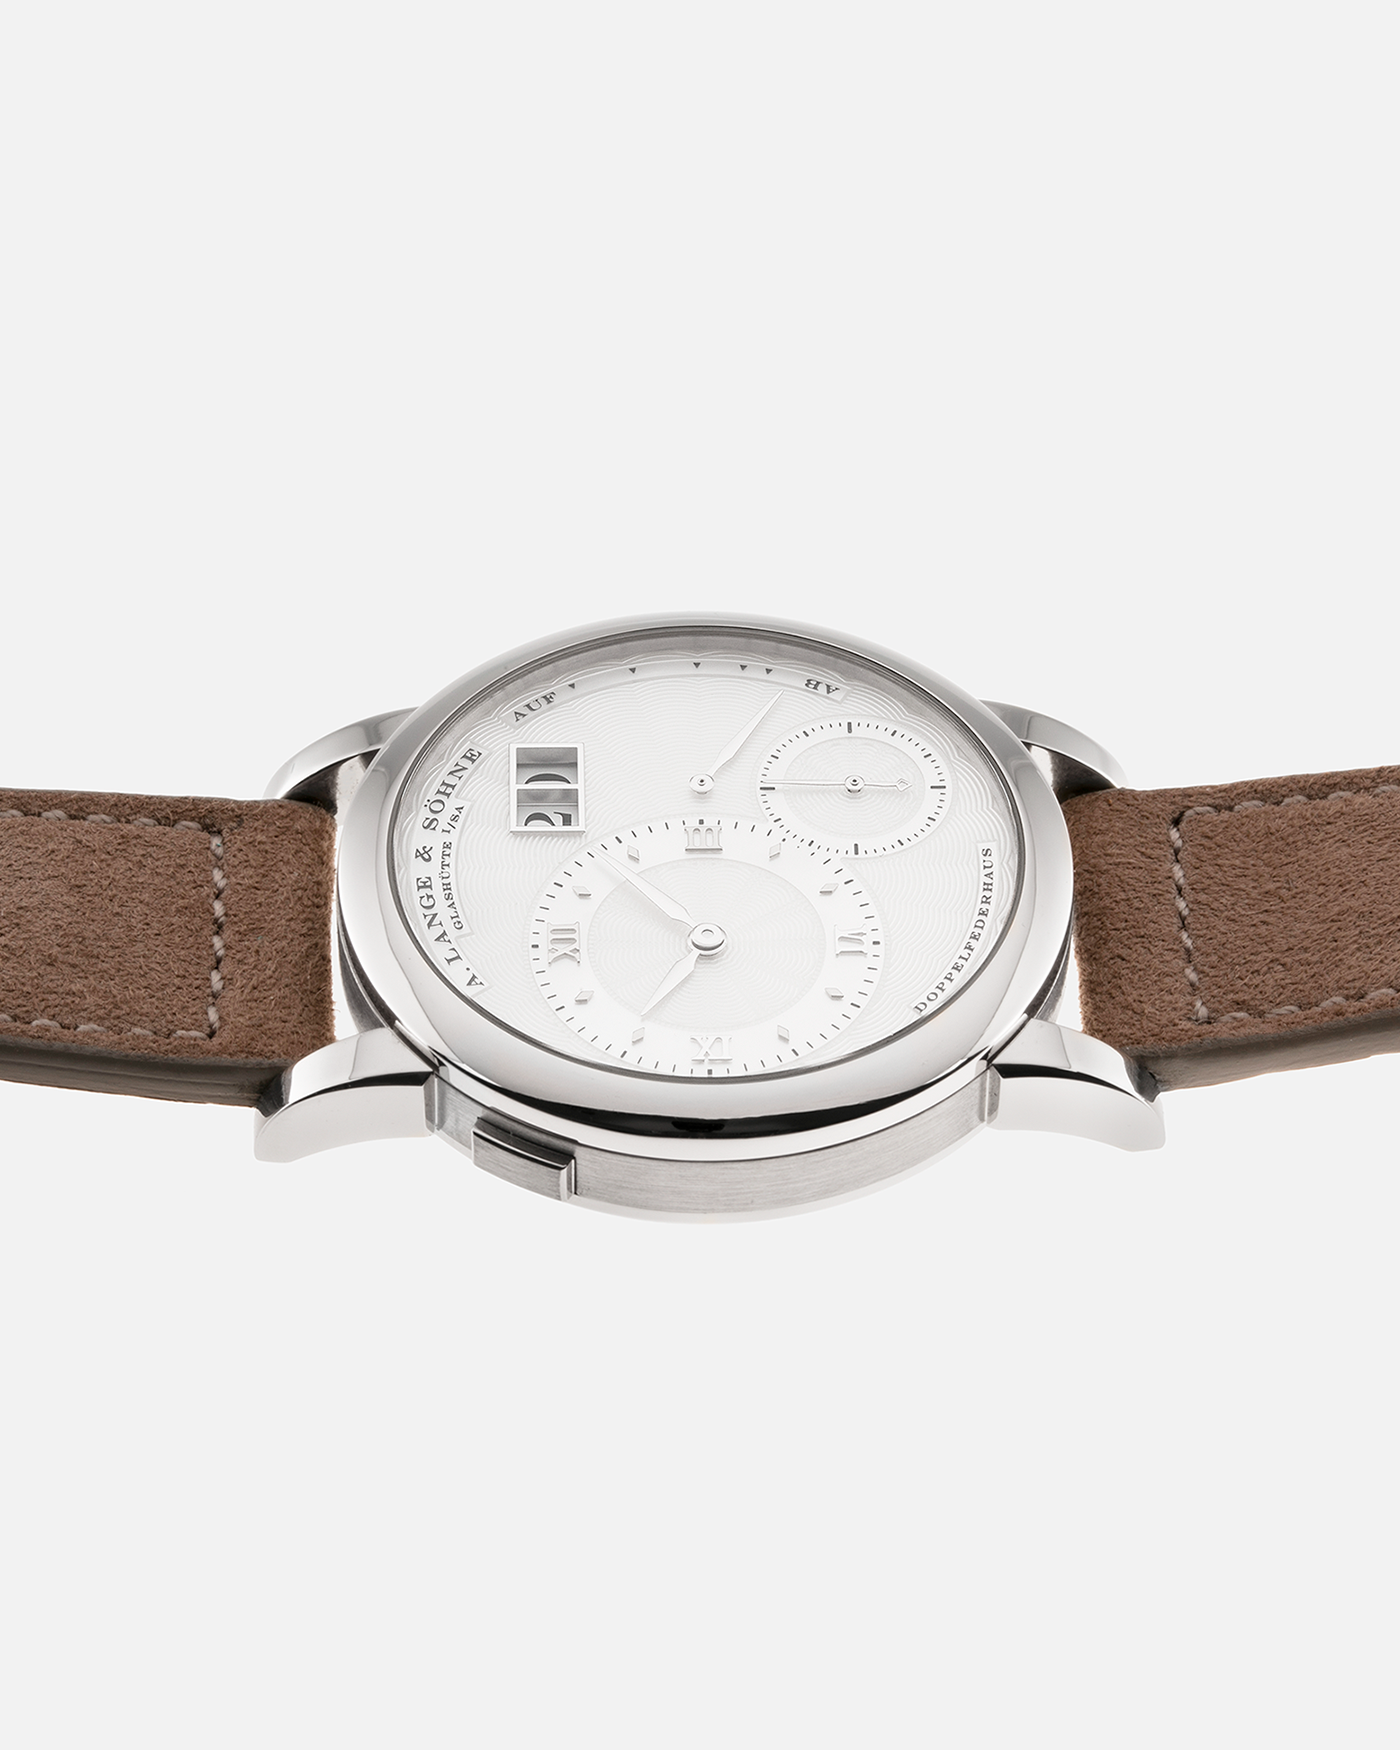 Brand: A. Lange & Sohne Year: 2000’s Model: Lange 1 Soiree Reference Number: 110.030 Material: 18k White Gold Movement: Manual Winding L901.5 Case Diameter: 38.5mm Bracelet/Strap: Molequin Taupe Suede with 18k White Gold Tang Buckle